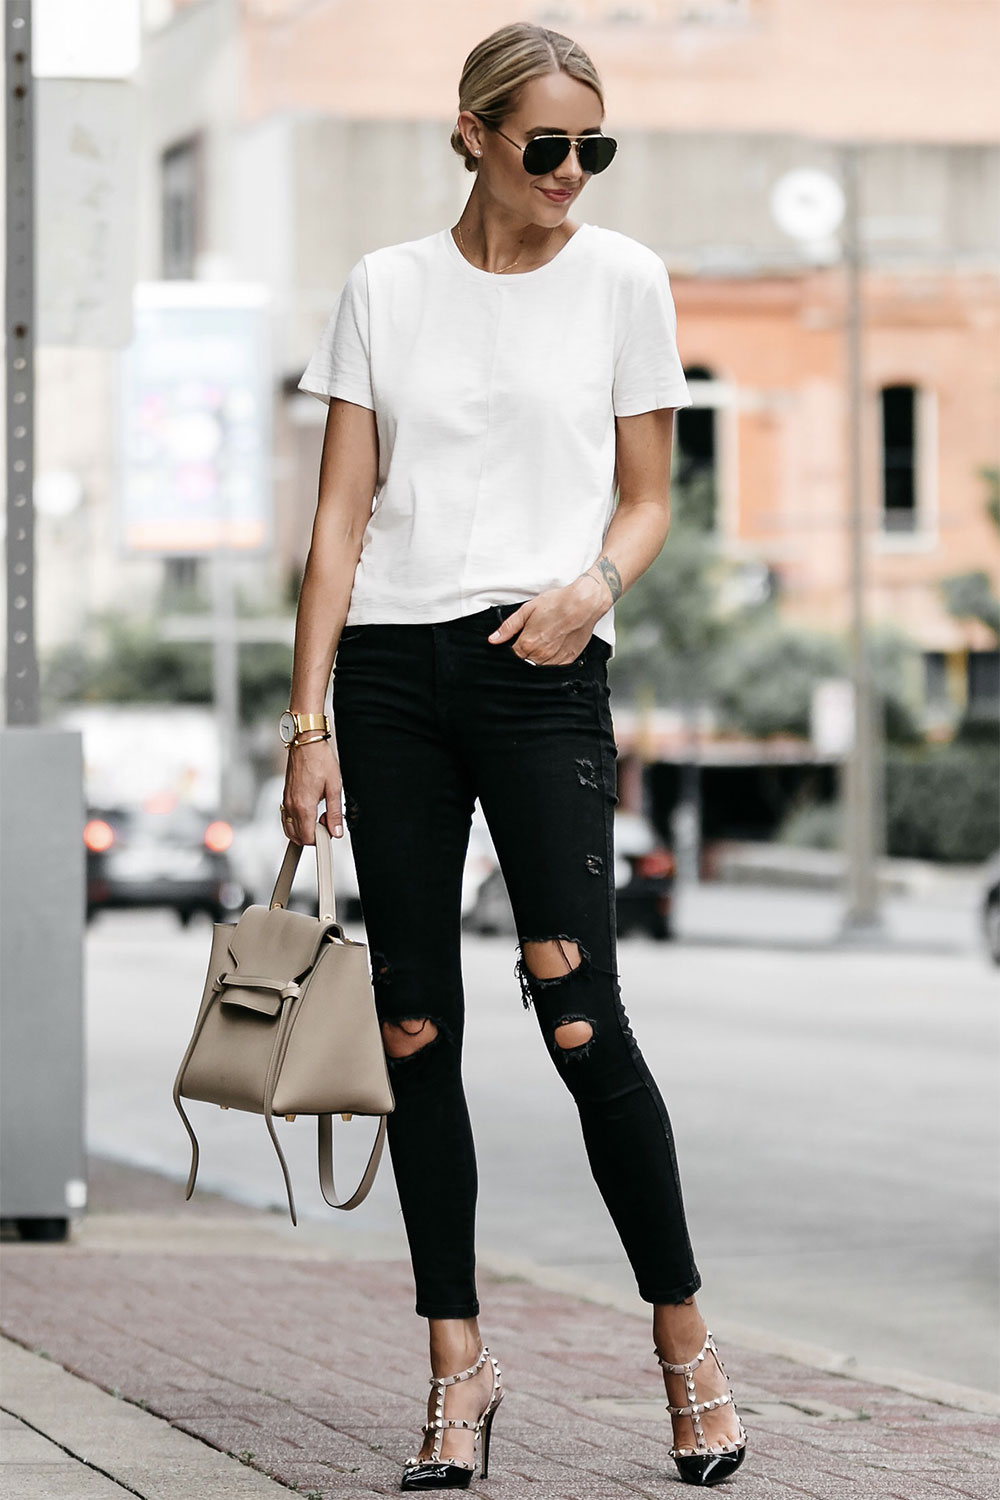 How to Wear Skinny Jeans - Outfitmag.com